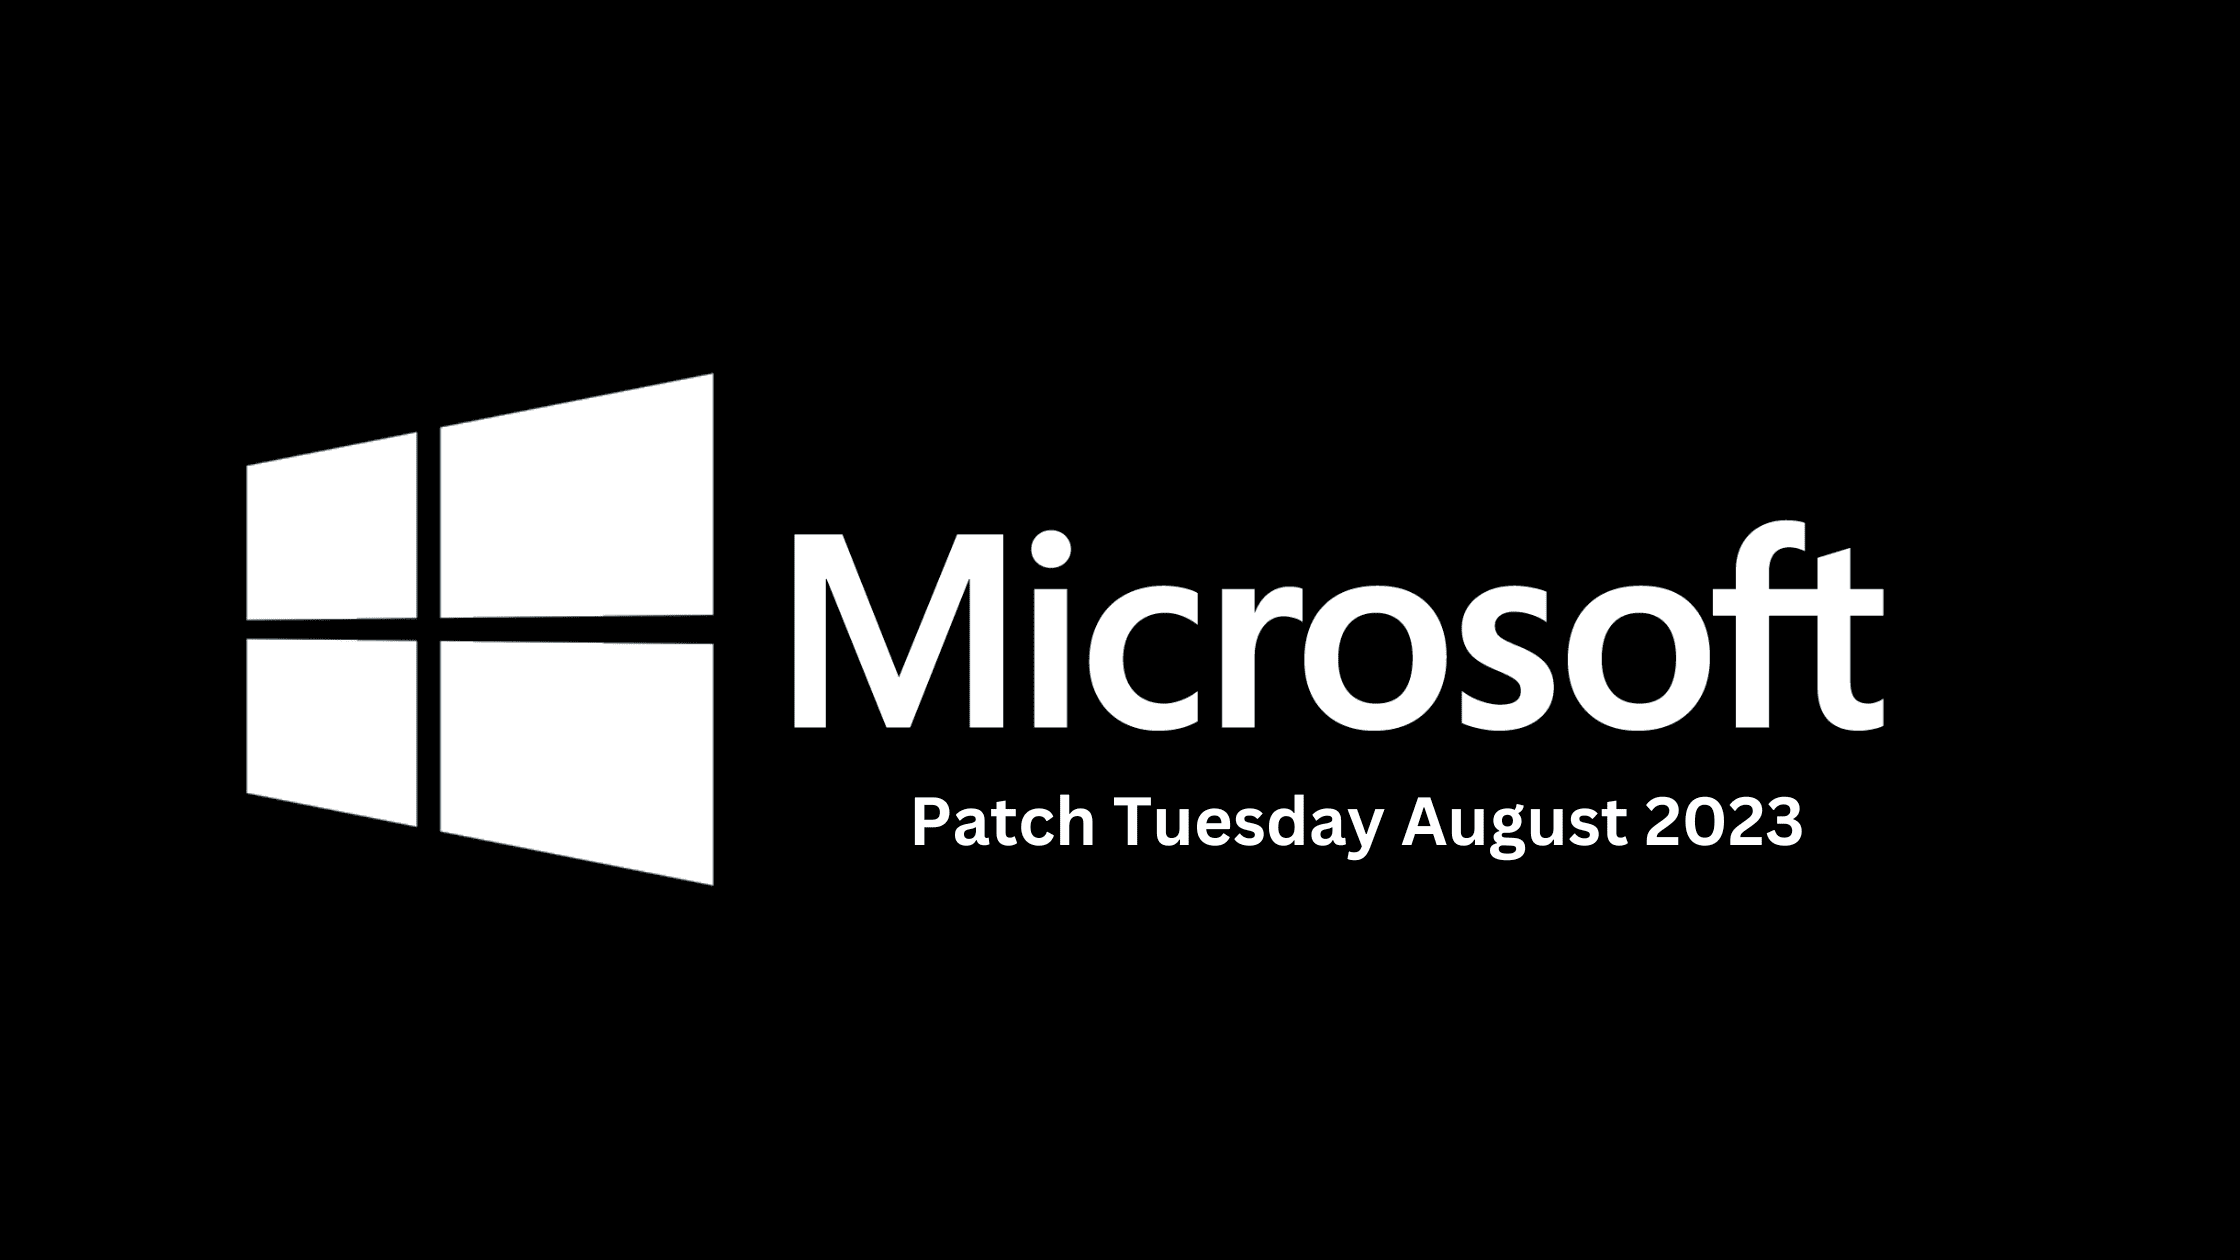 Breaking Down The Latest August 2023 Patch Tuesday Report